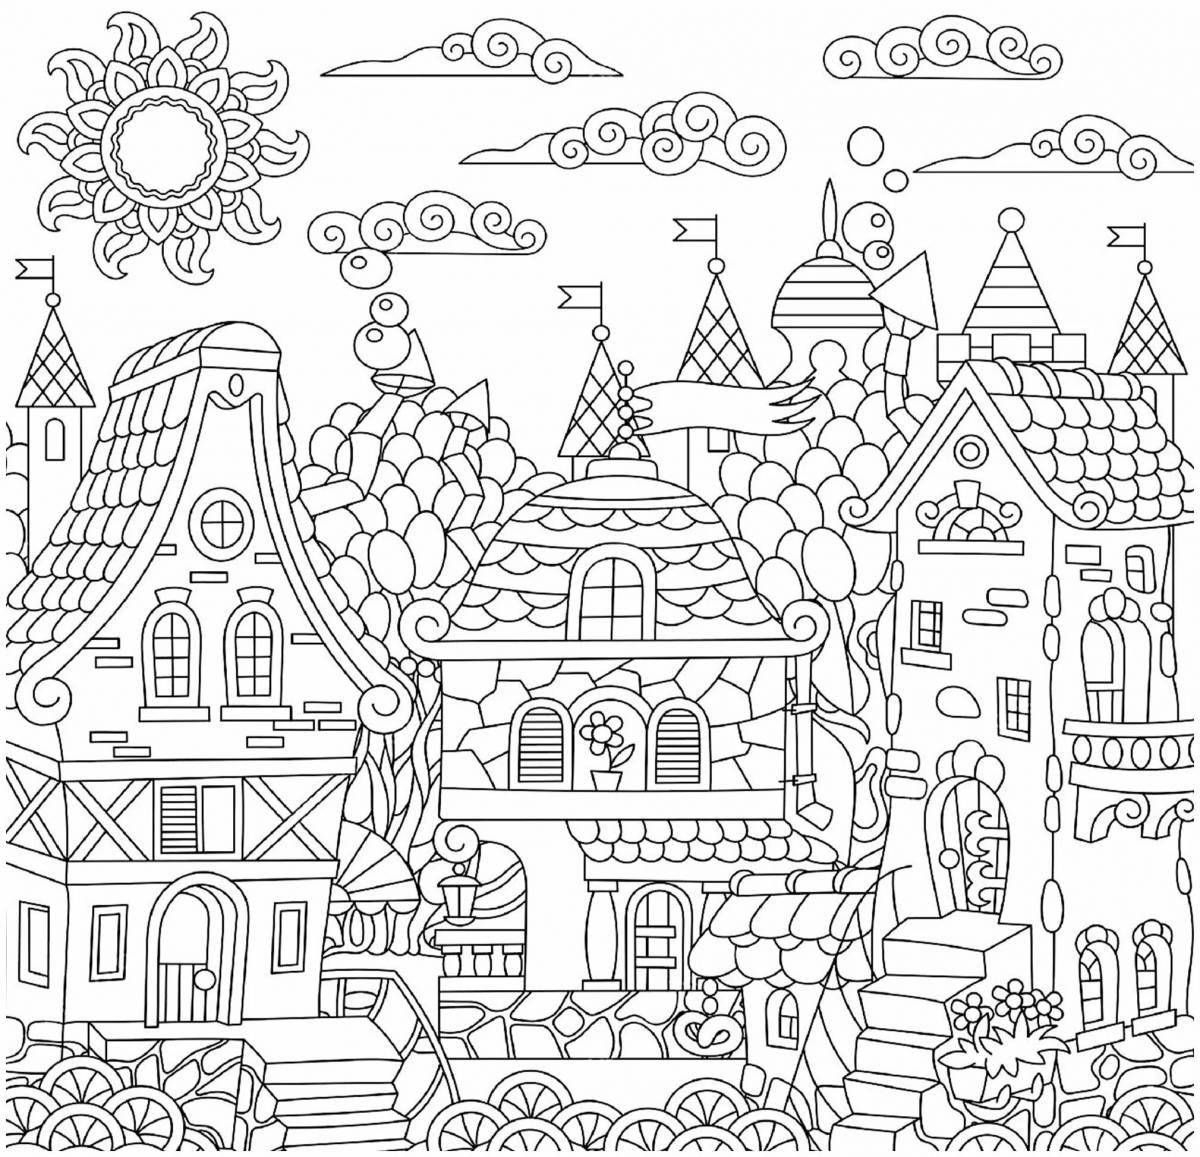 Coloring book fabulous city - luxurious